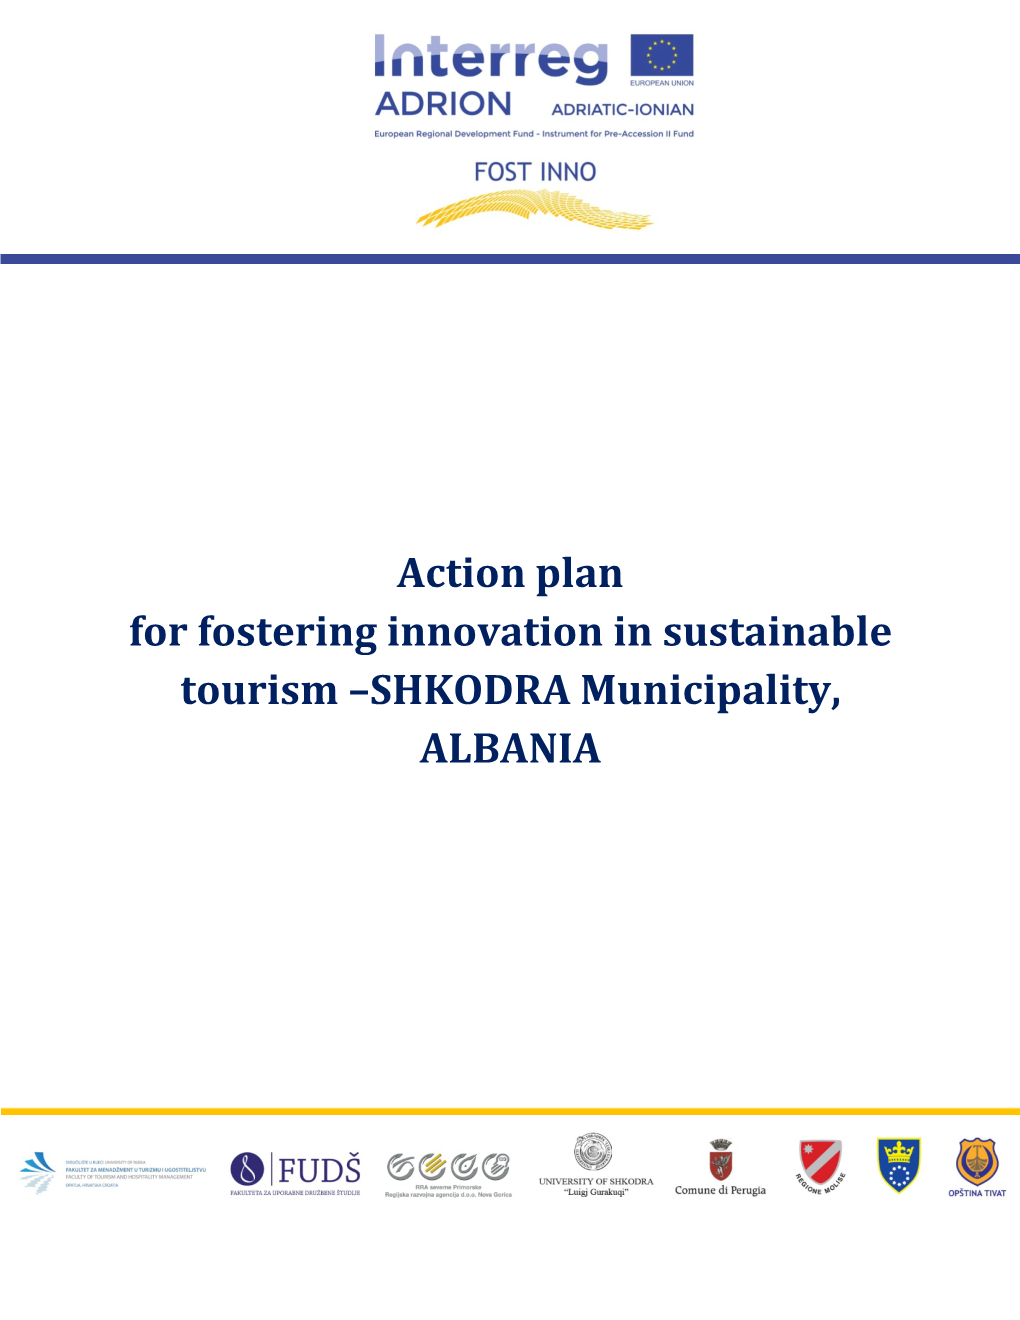 Action Plan for Fostering Innovation in Sustainable Tourism –SHKODRA Municipality